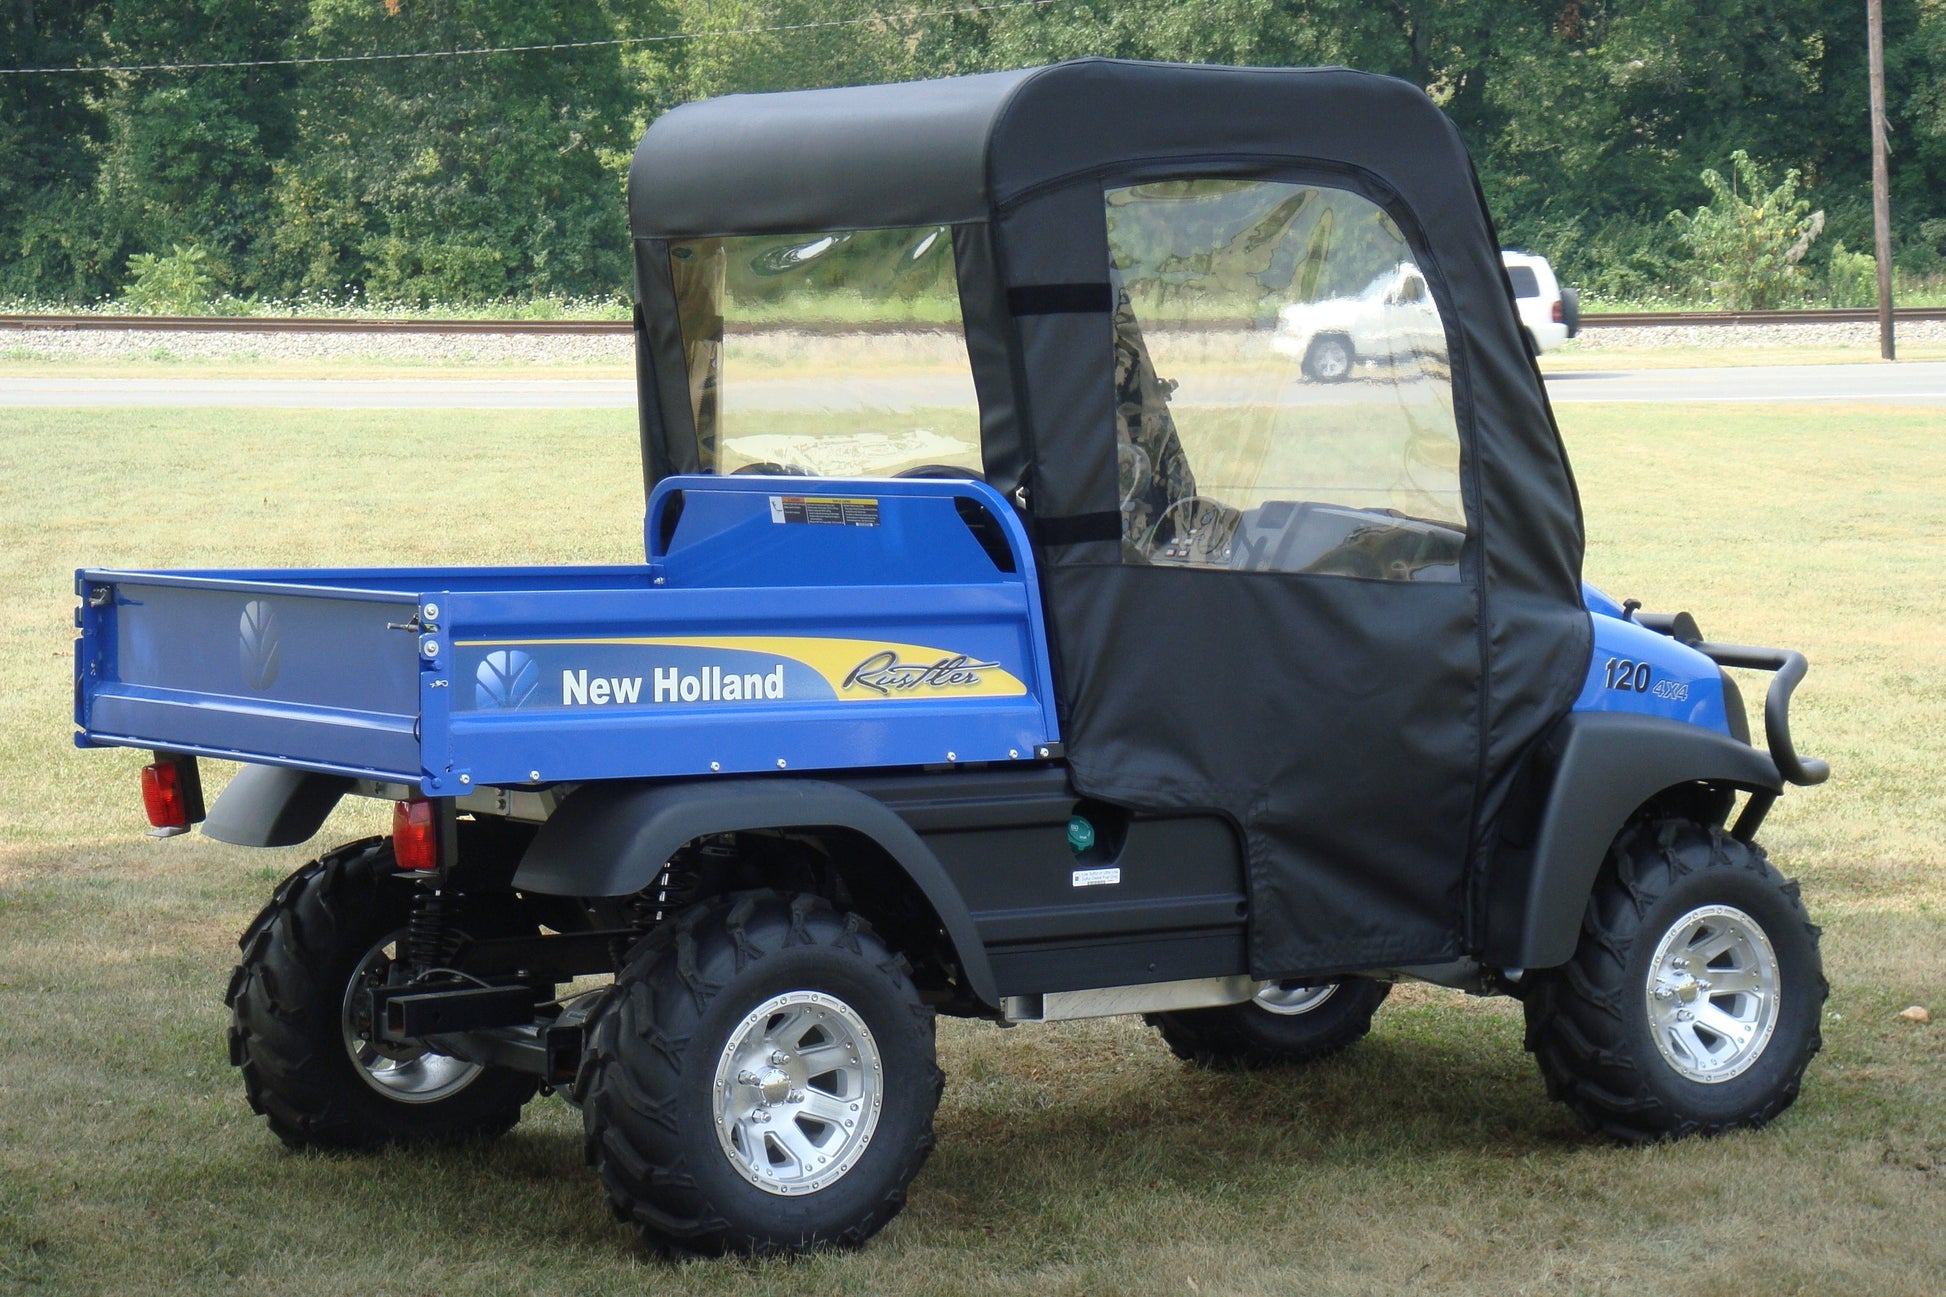 New Holland Rustler 115 - Full Cab for Hard Windshield with Color and Zip Window Options - 3 Star UTV